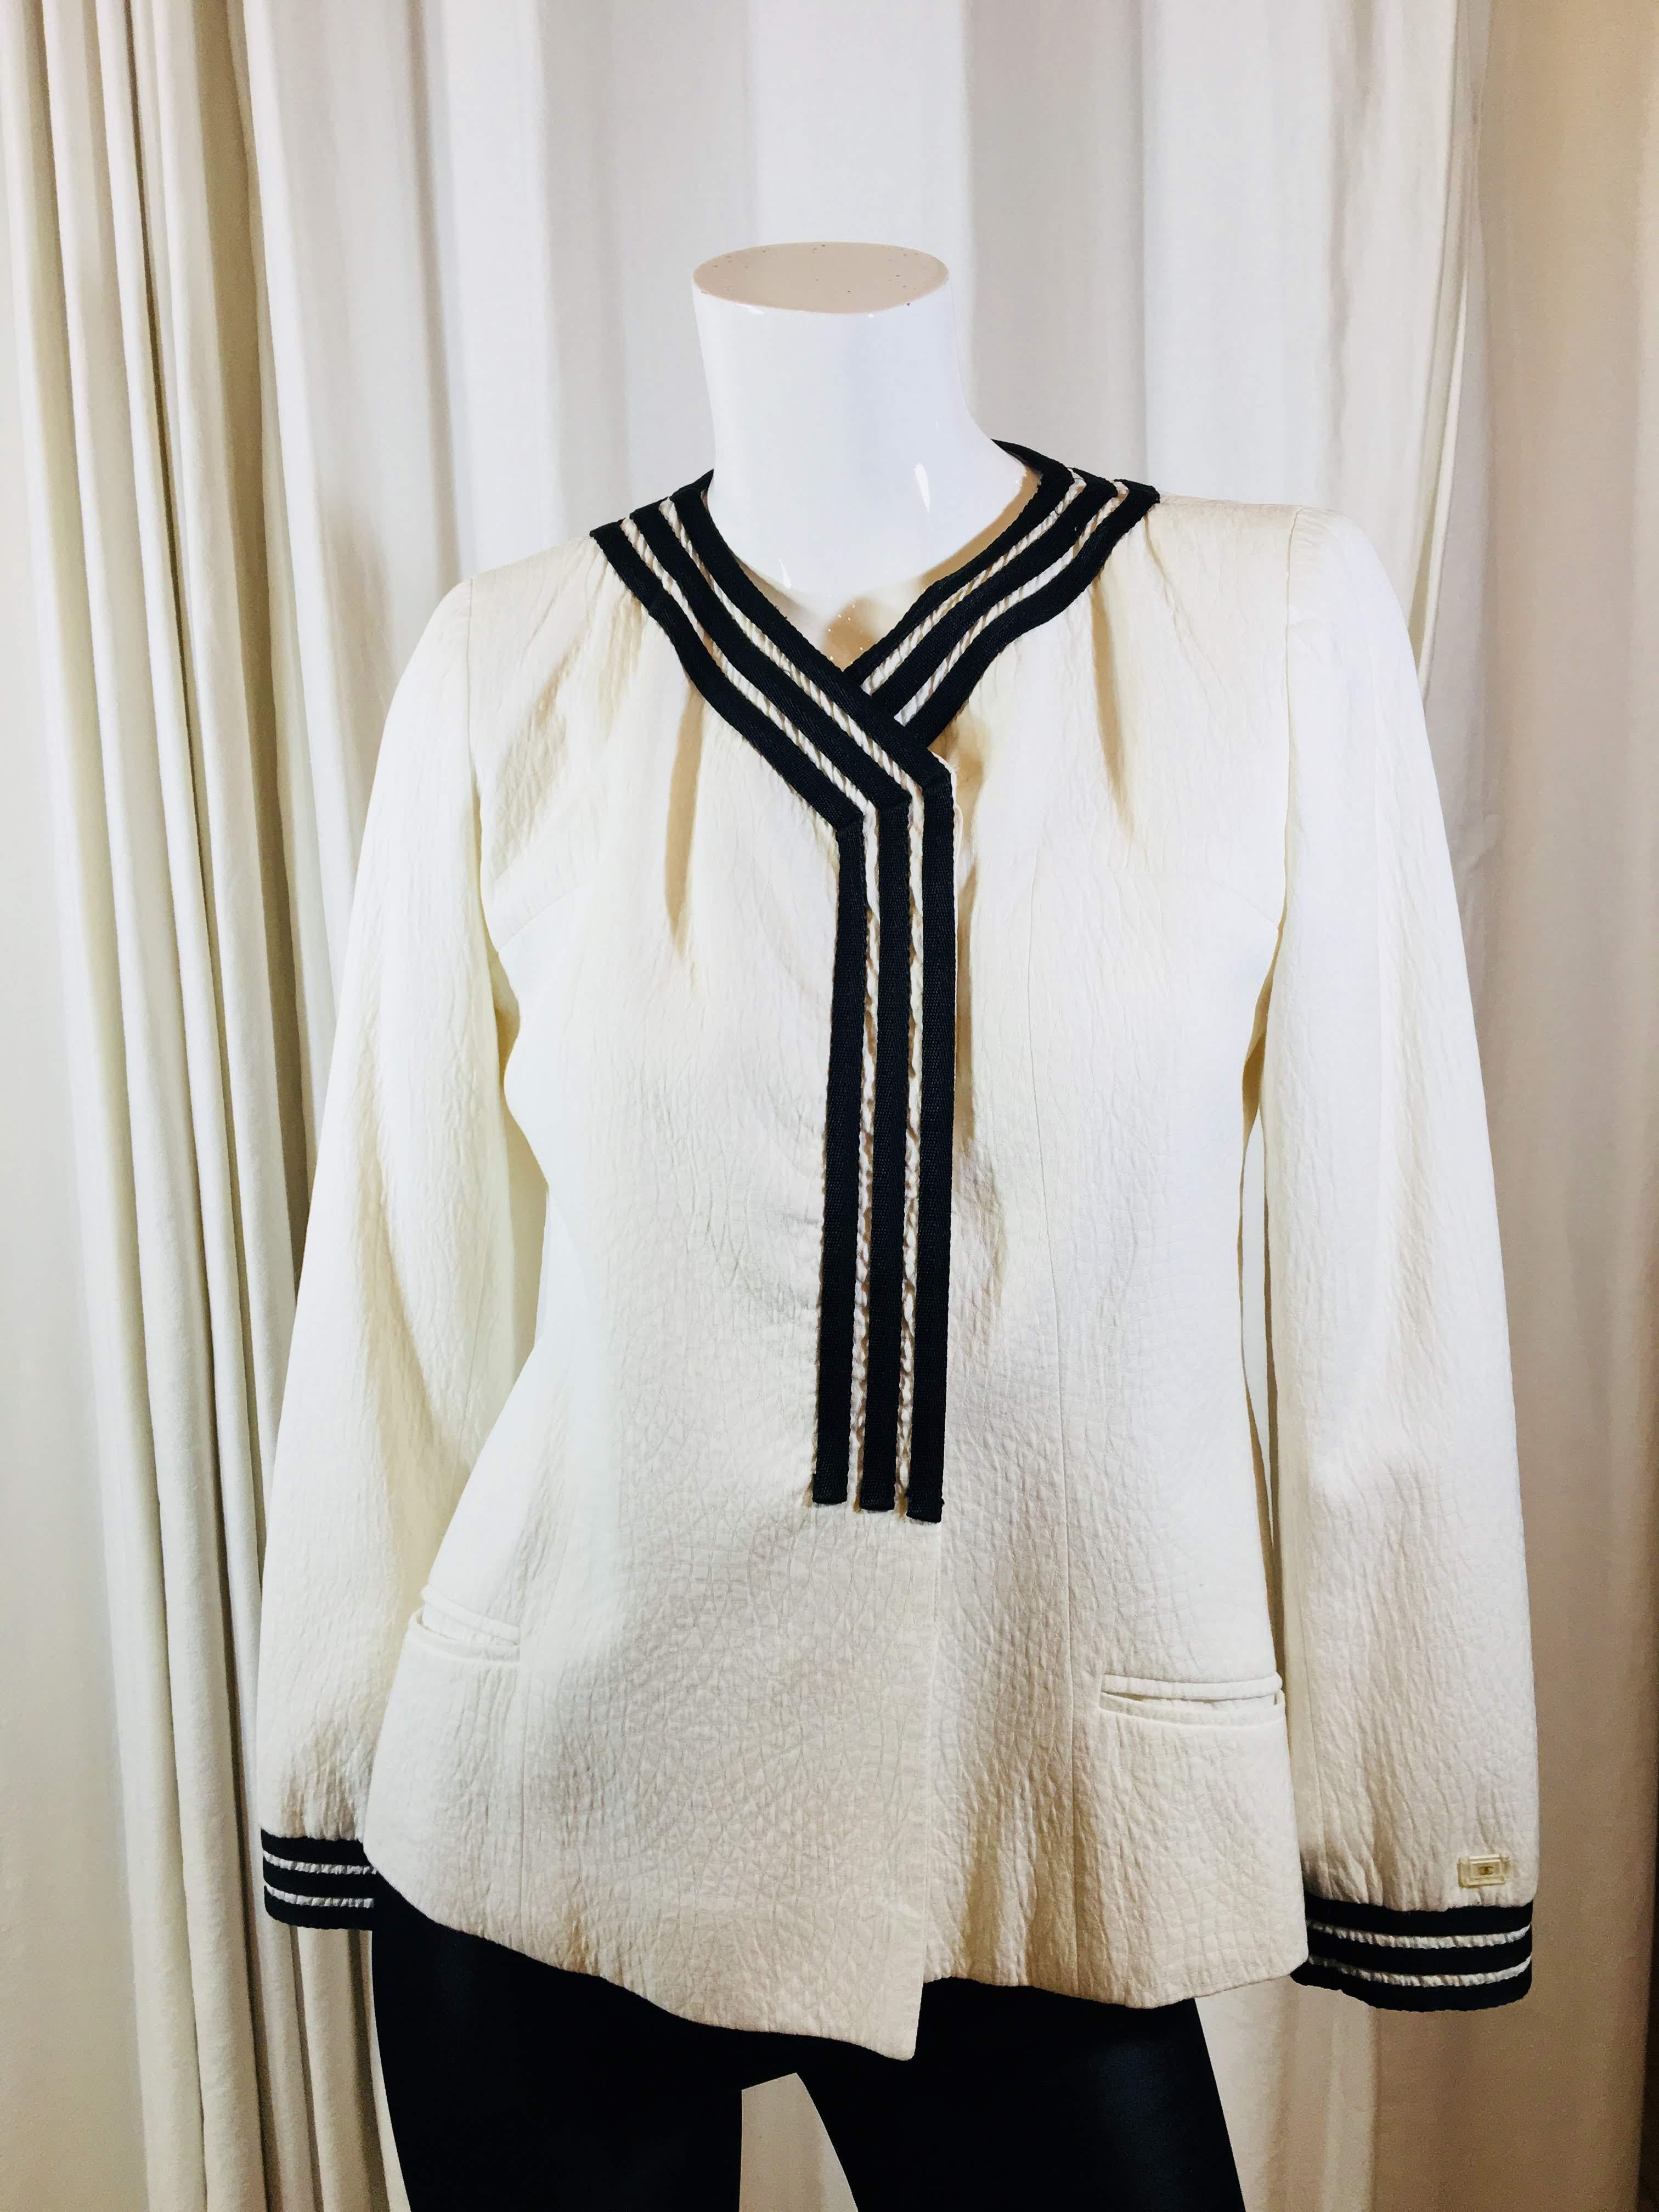 Chanel White Off-Center Jacket with Black and White Stripe Trim on Neckline and Cuffs, Textured Black Pants with Front Slit Pockets.